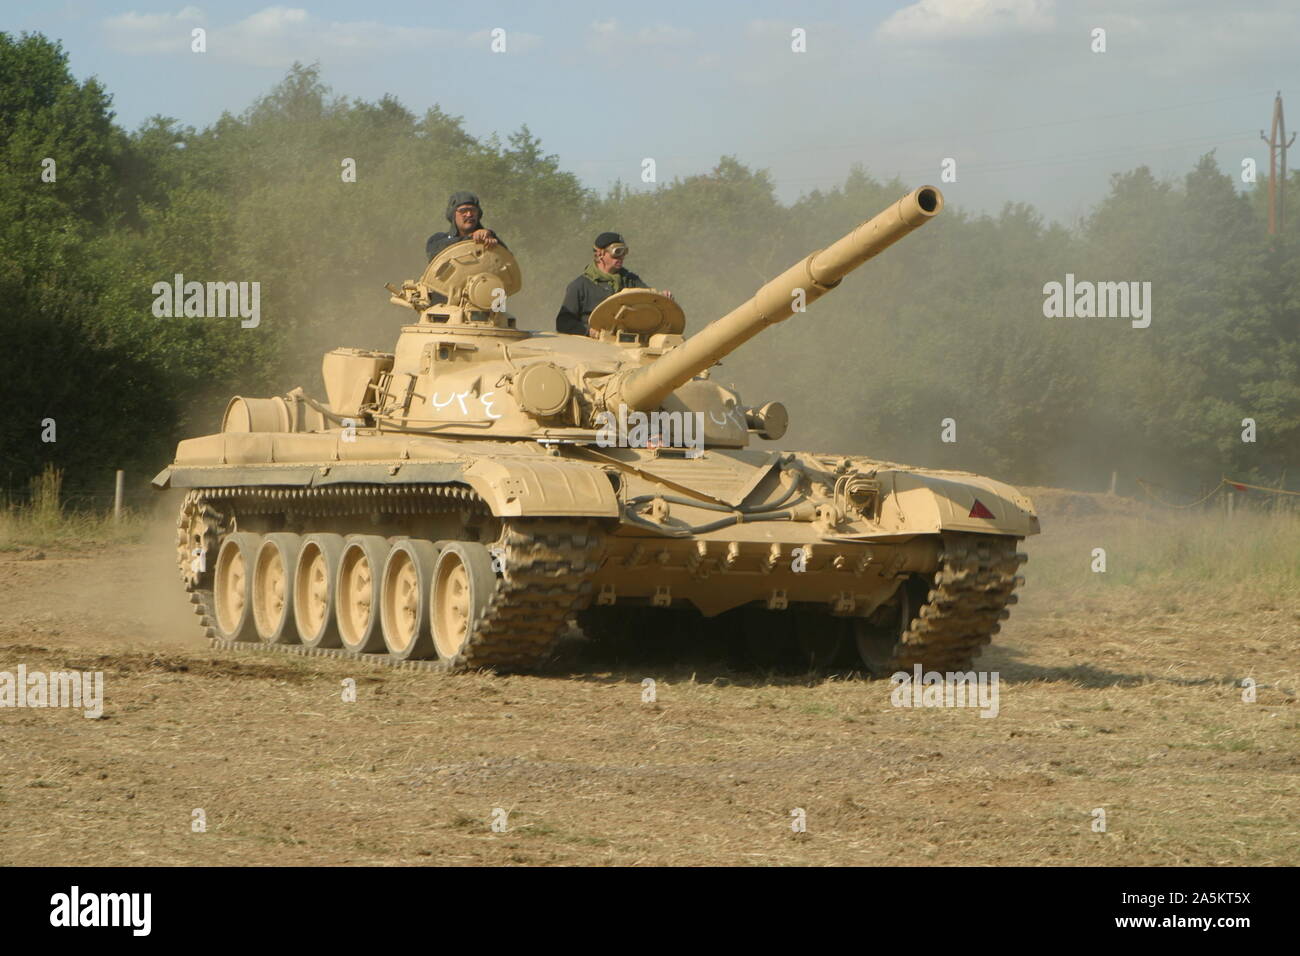 Russian T 72 In Iraqi Gulf War Markings The Tank Has A 3 Man Crew The Tank Was Widely Exported To Client States Of The Former Soviet Union Stock Photo Alamy